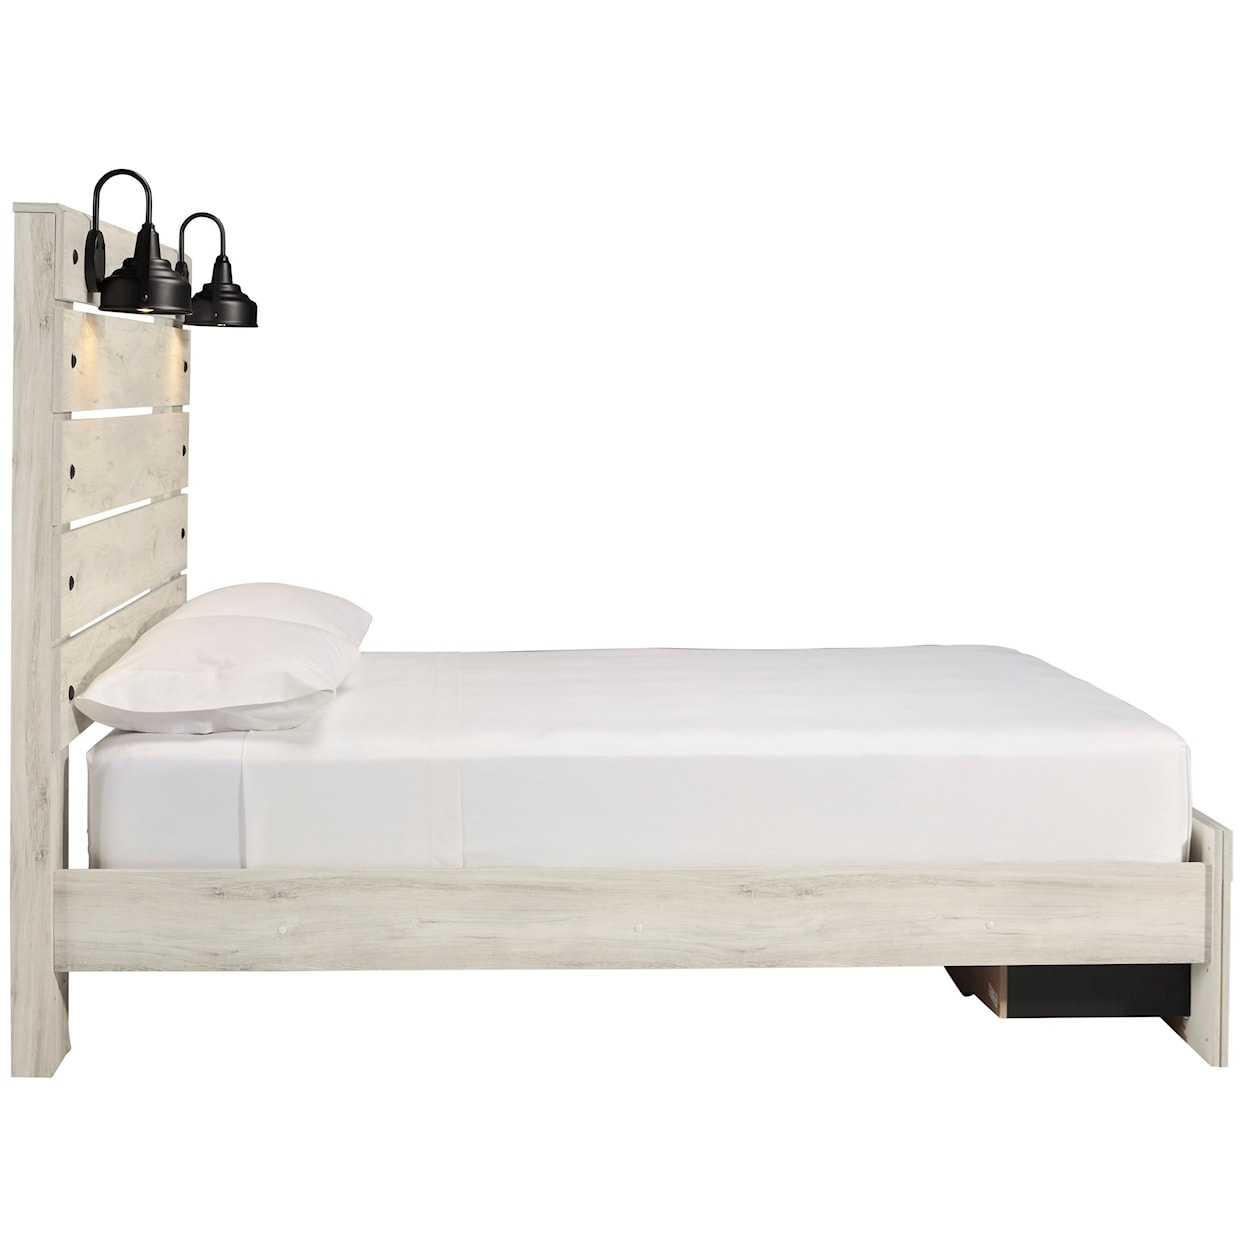 Signature Design by Ashley Cambeck Queen Bed w/ Lights & Footboard Drawers